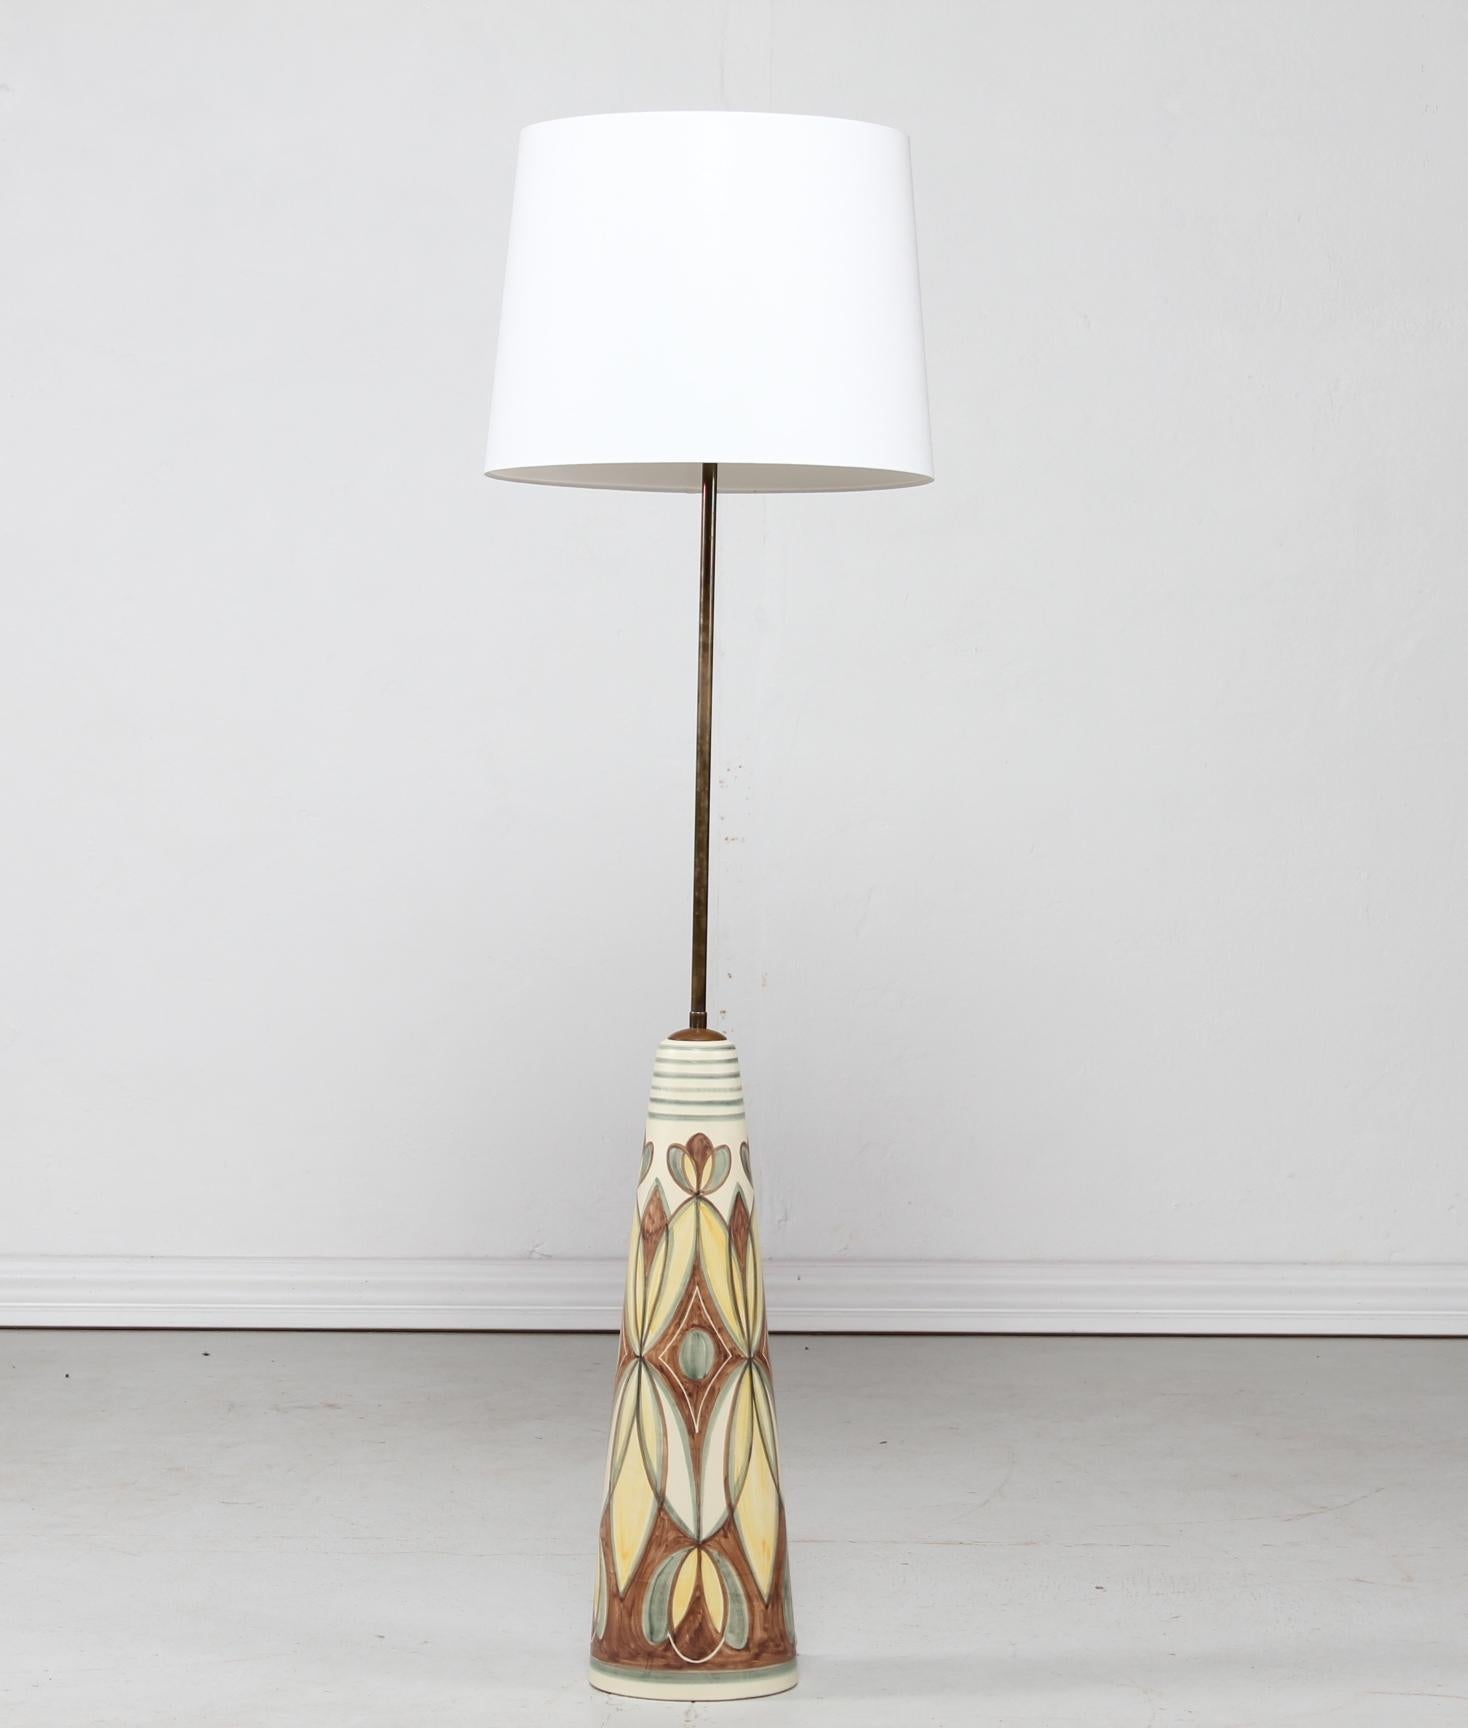 Huge conical hand painted ceramic floor lamp by the Danish artist Rigmor Nielsen for Søholm, Bornholm, Denmark.
The ceramic foot is decorated with a flower motif on an off-white glaze.
It has a brass stem and Included is a new lampshade designed